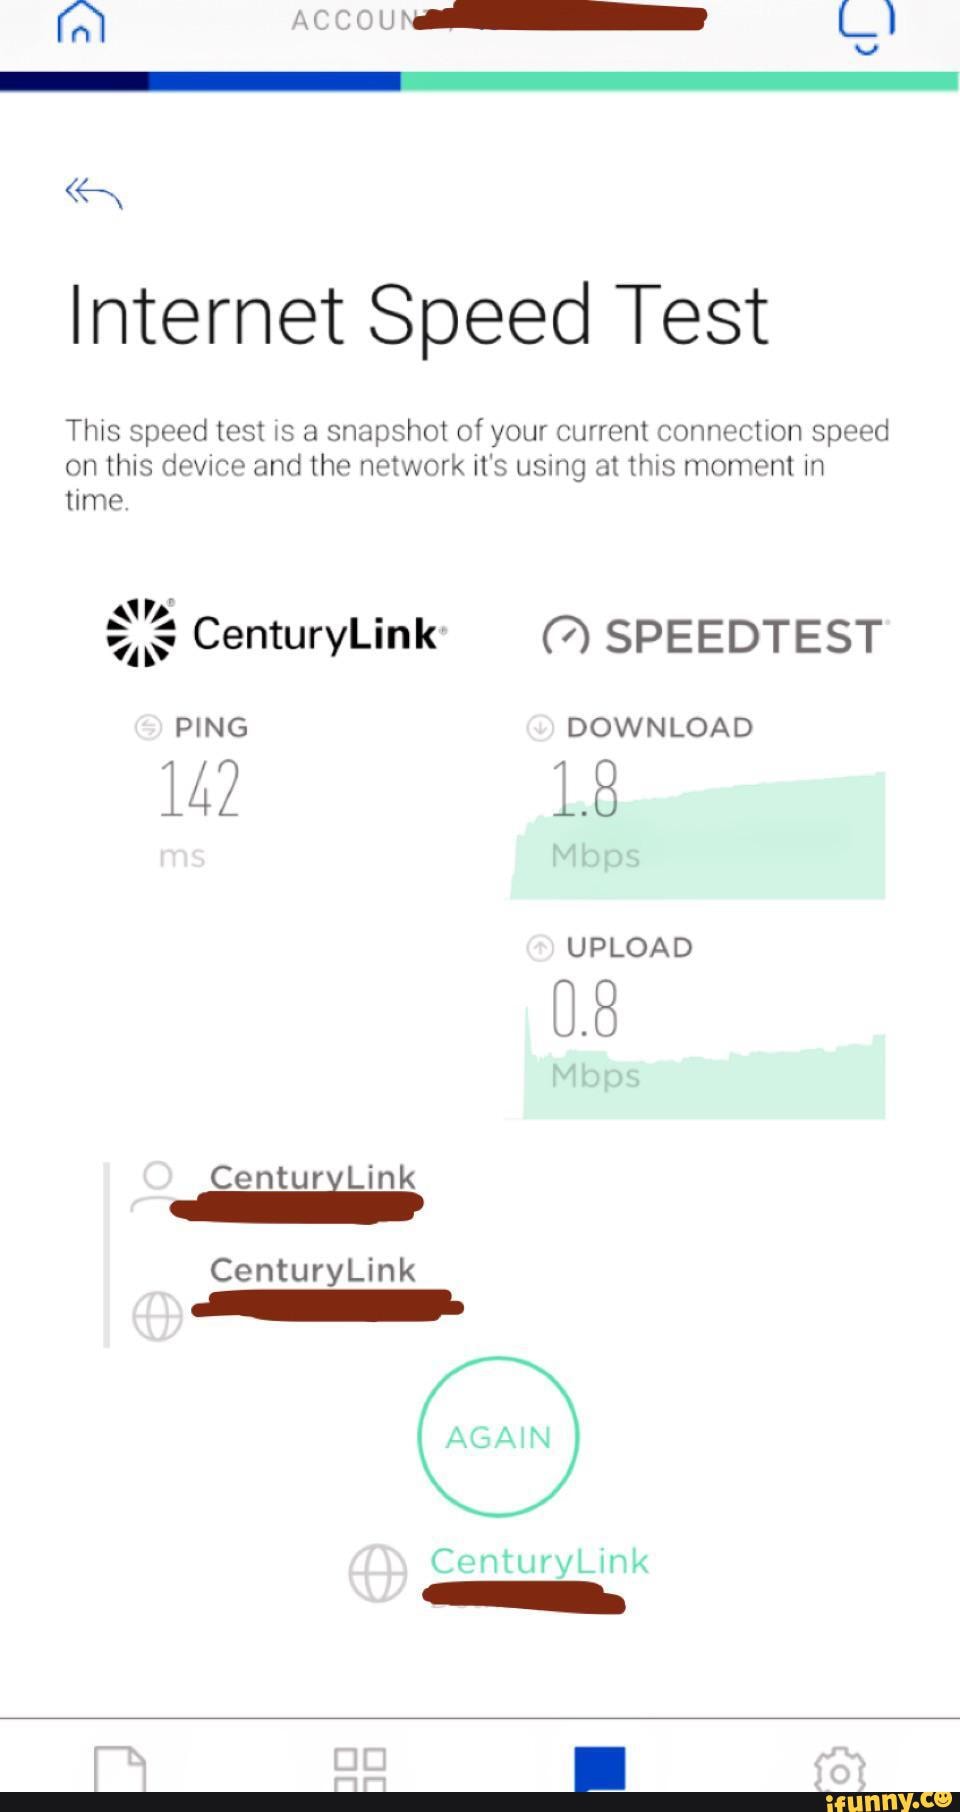 what is centurylink upload and download speed